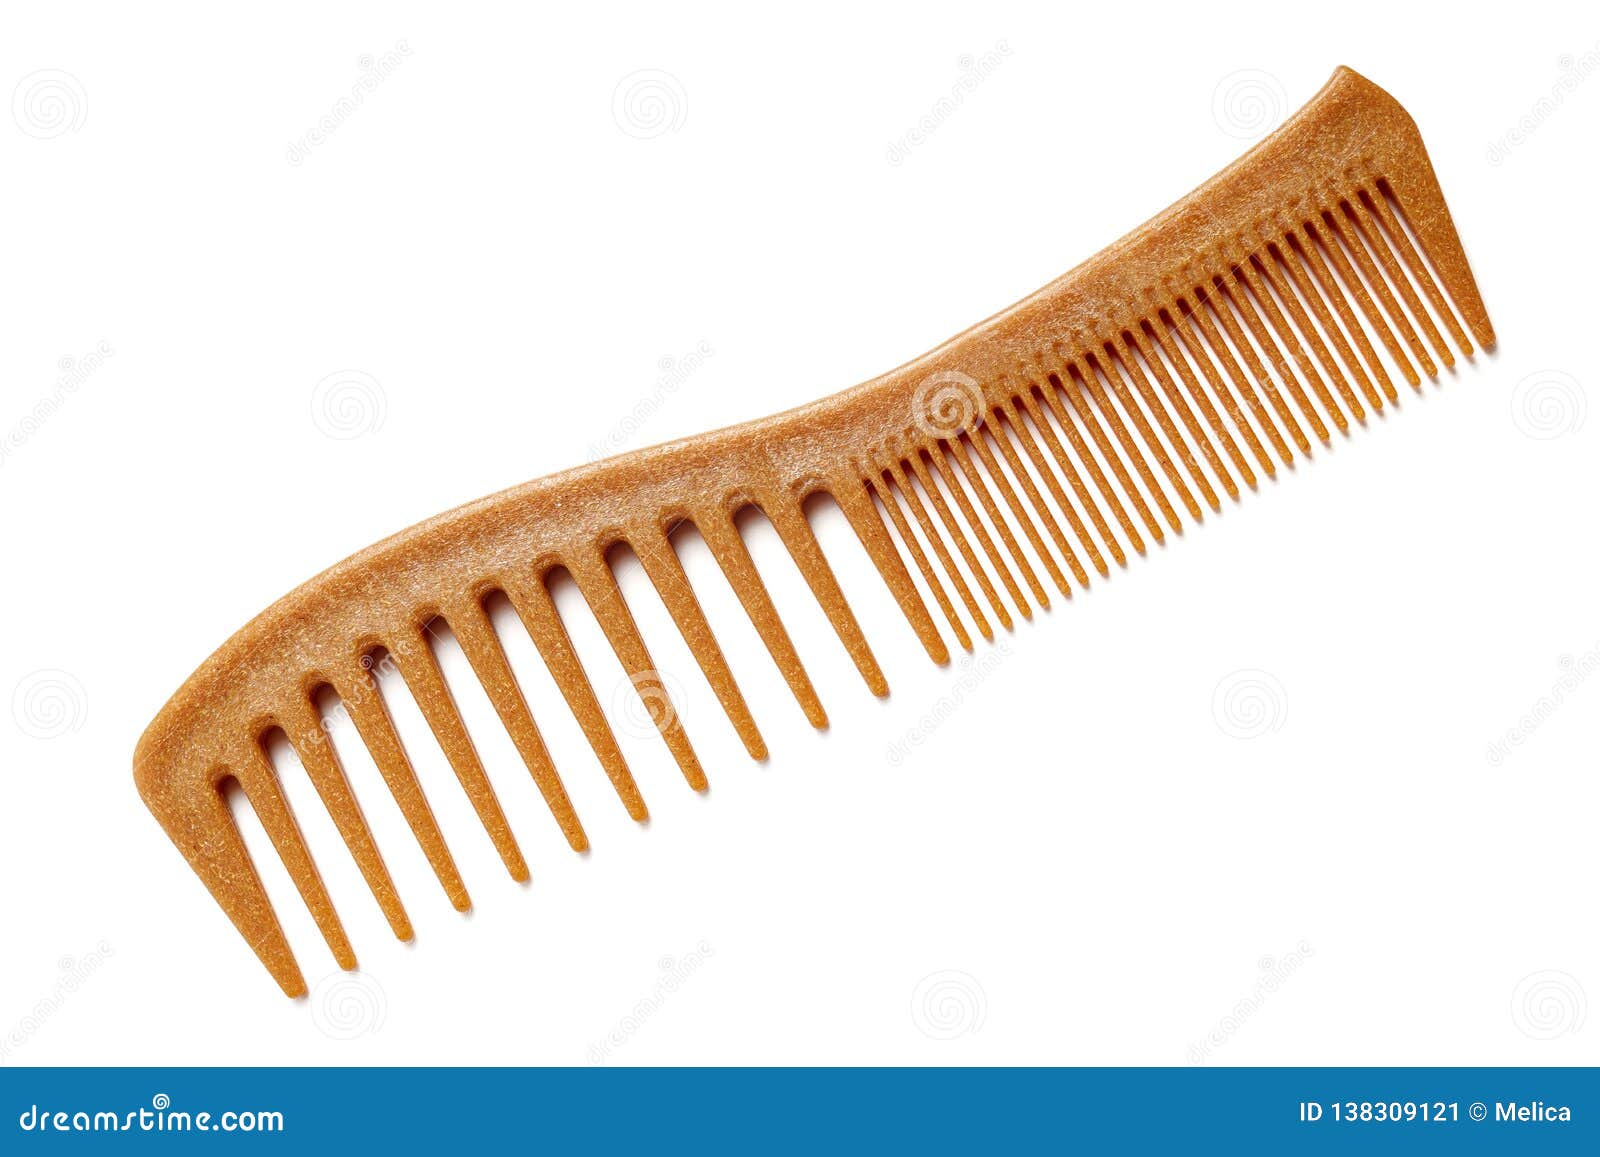 Natural Bamboo Hair Comb stock image. Image of hairstyle - 138309121